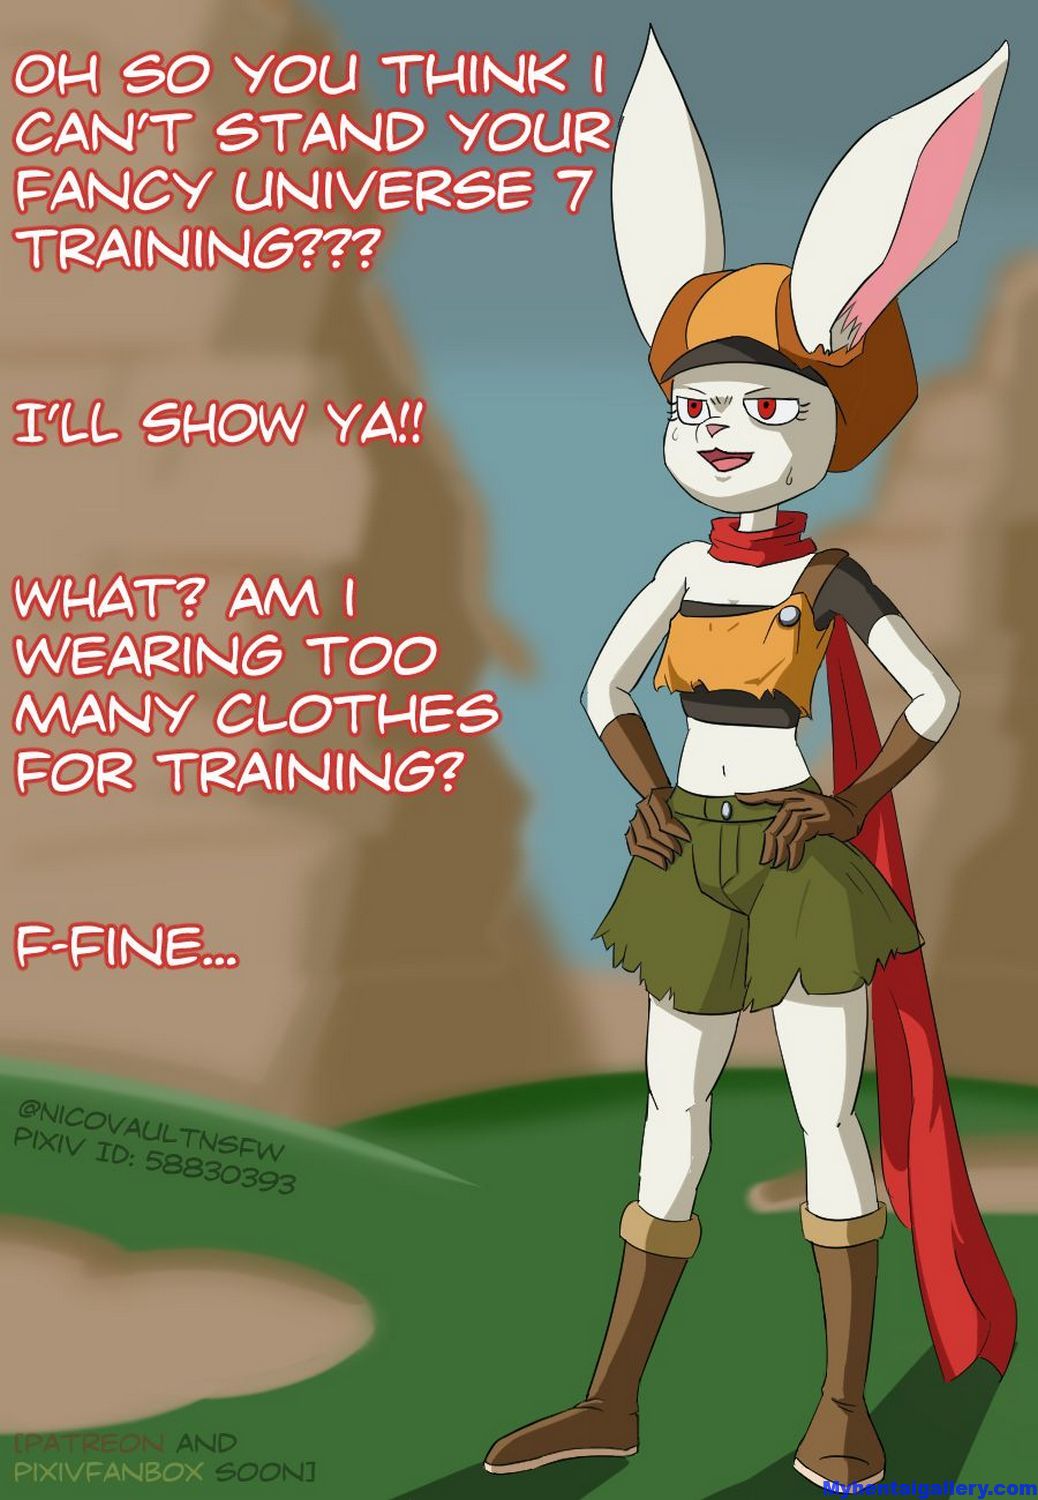 Cover Universe 7 Training